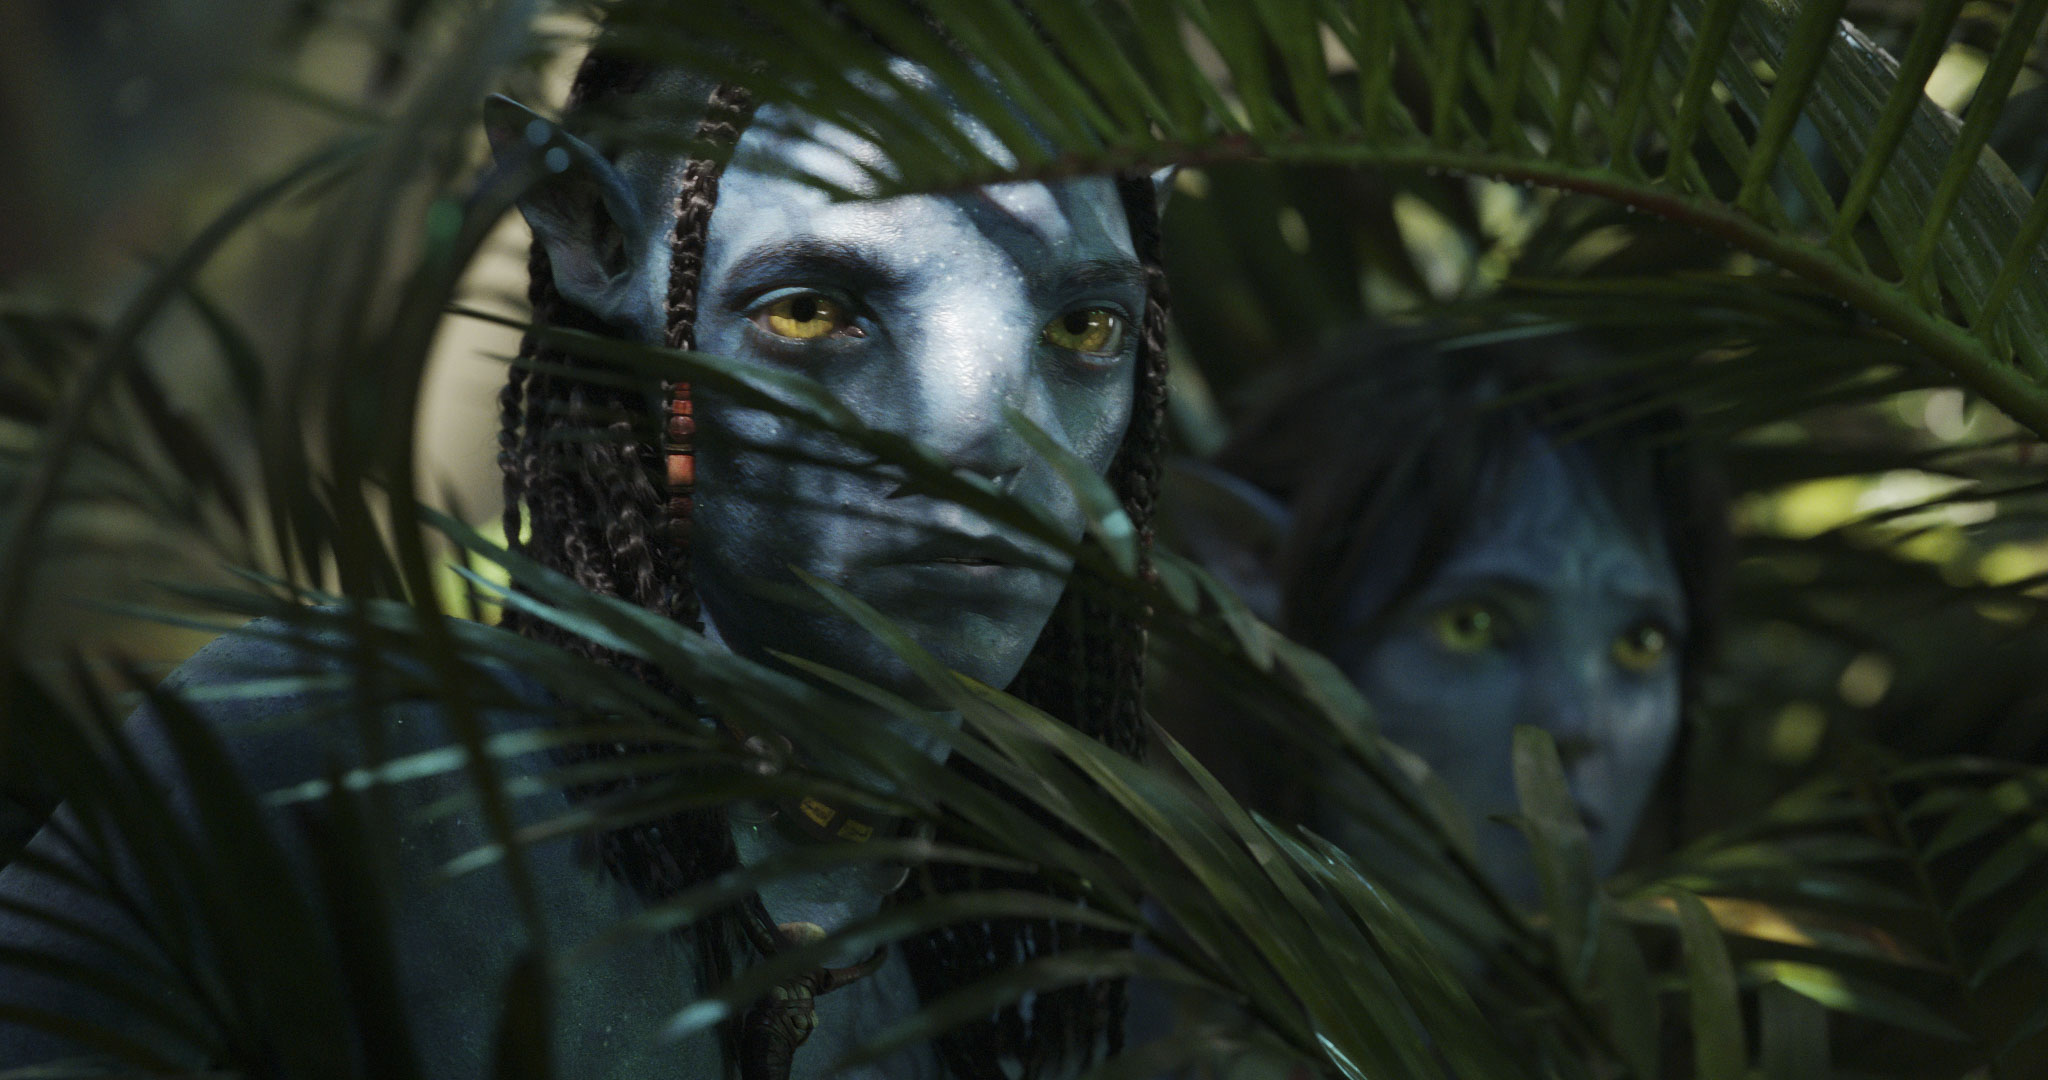 James Cameron Says He May Not Direct 'Avatar' 4 & 5